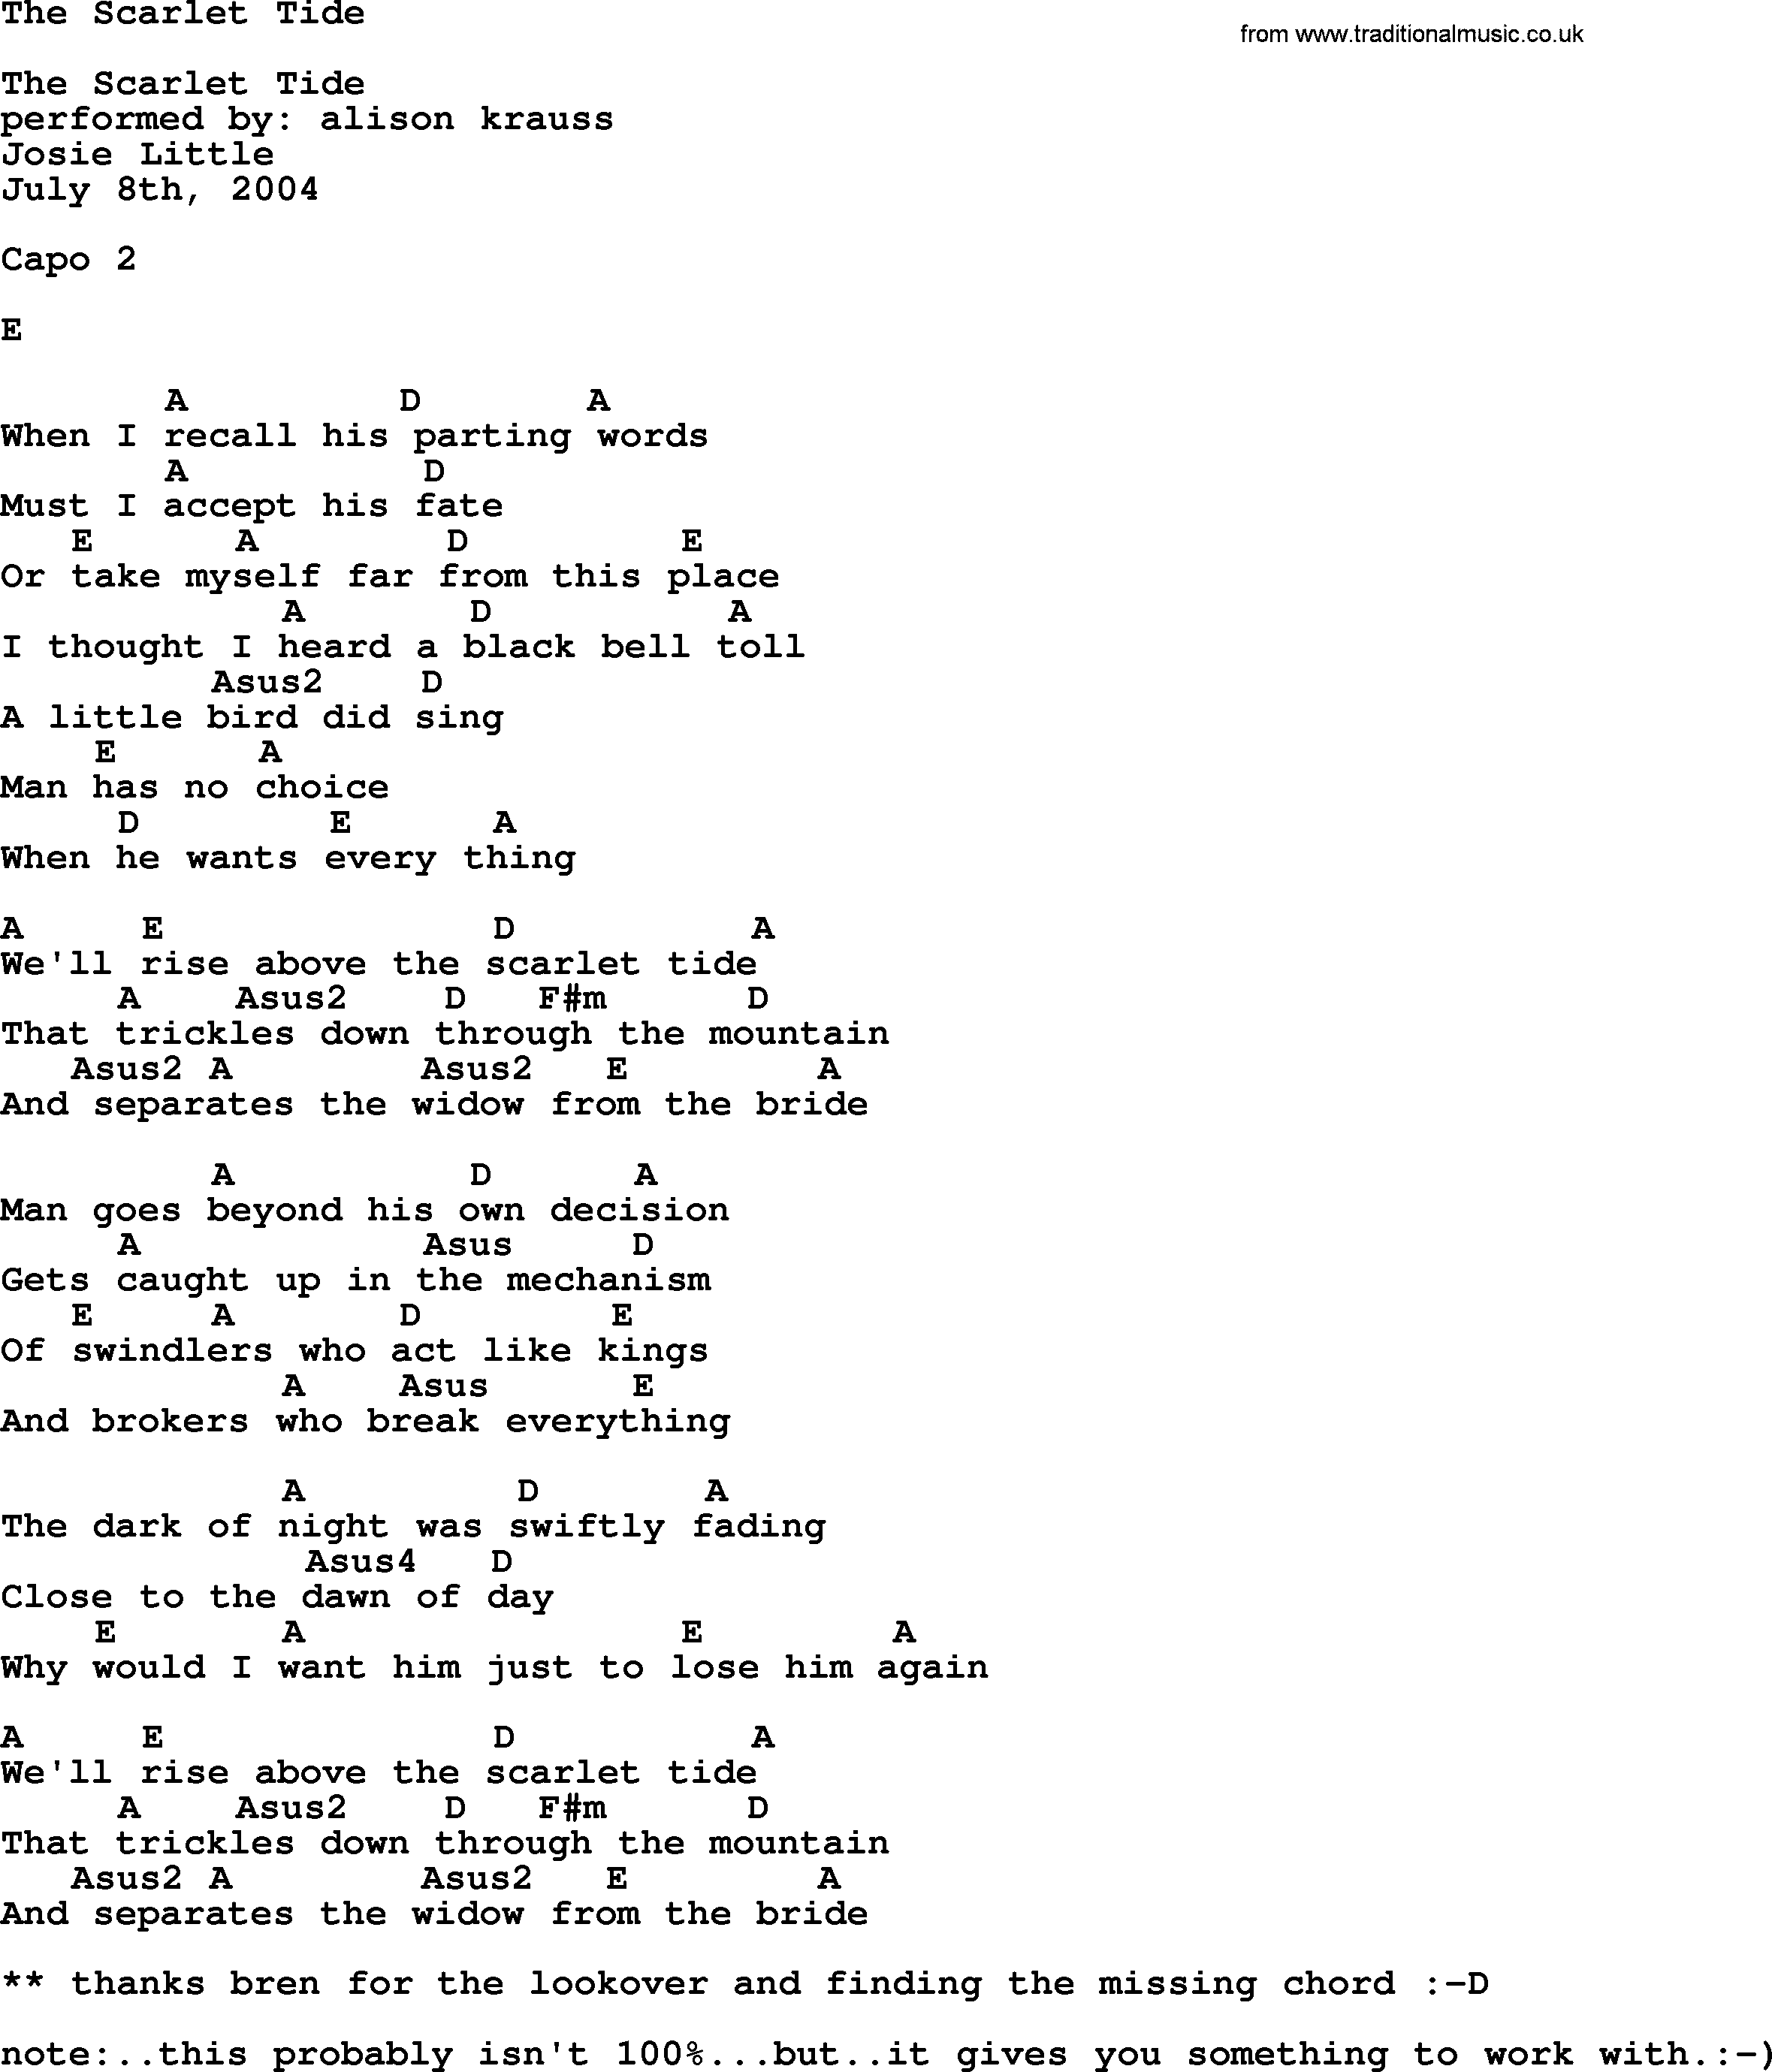 Bluegrass song: The Scarlet Tide, lyrics and chords